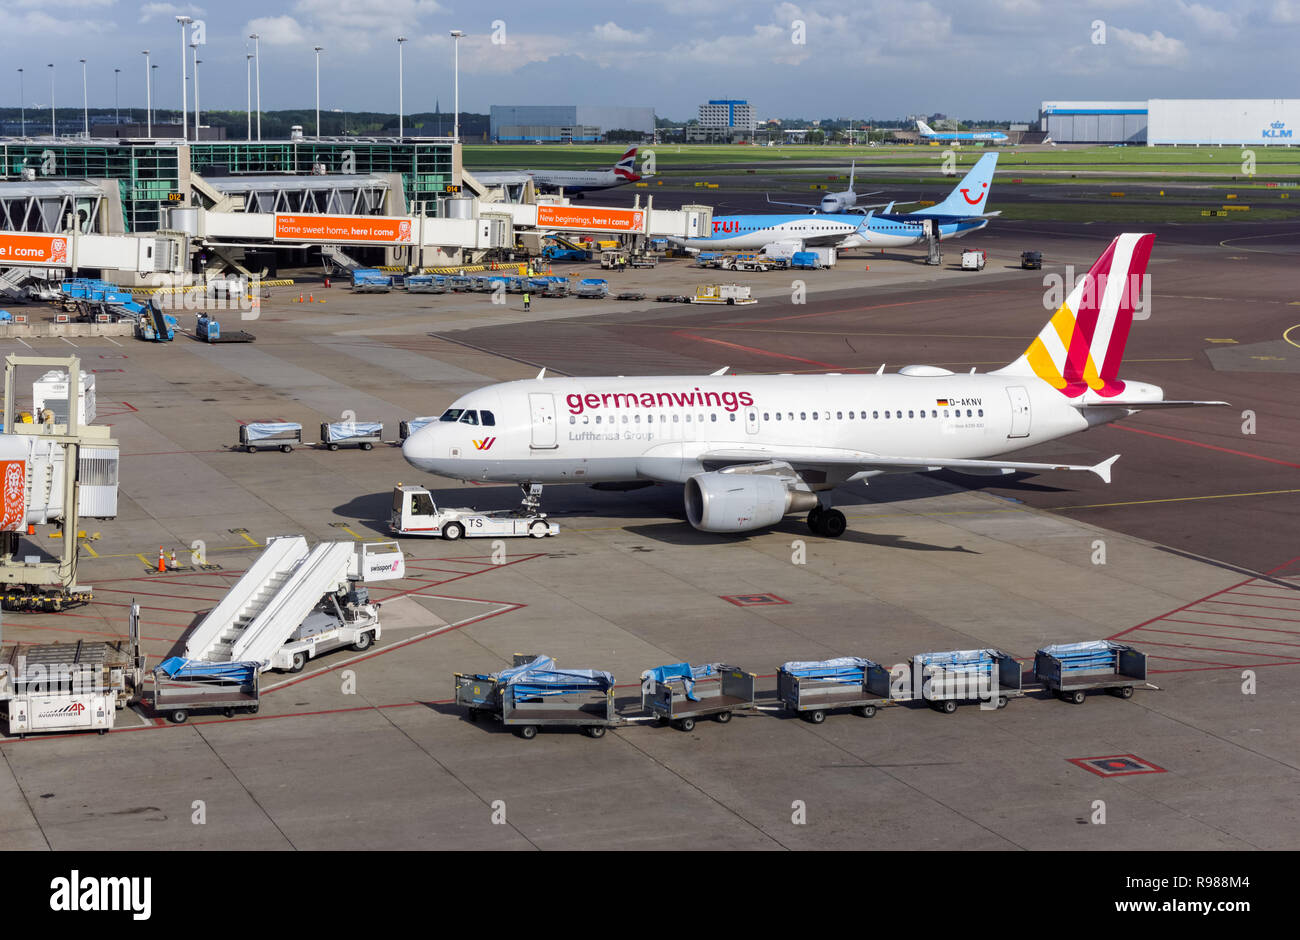 Germanwings plane at Amsterdam Airport Schiphol, Netherlands Stock Photo